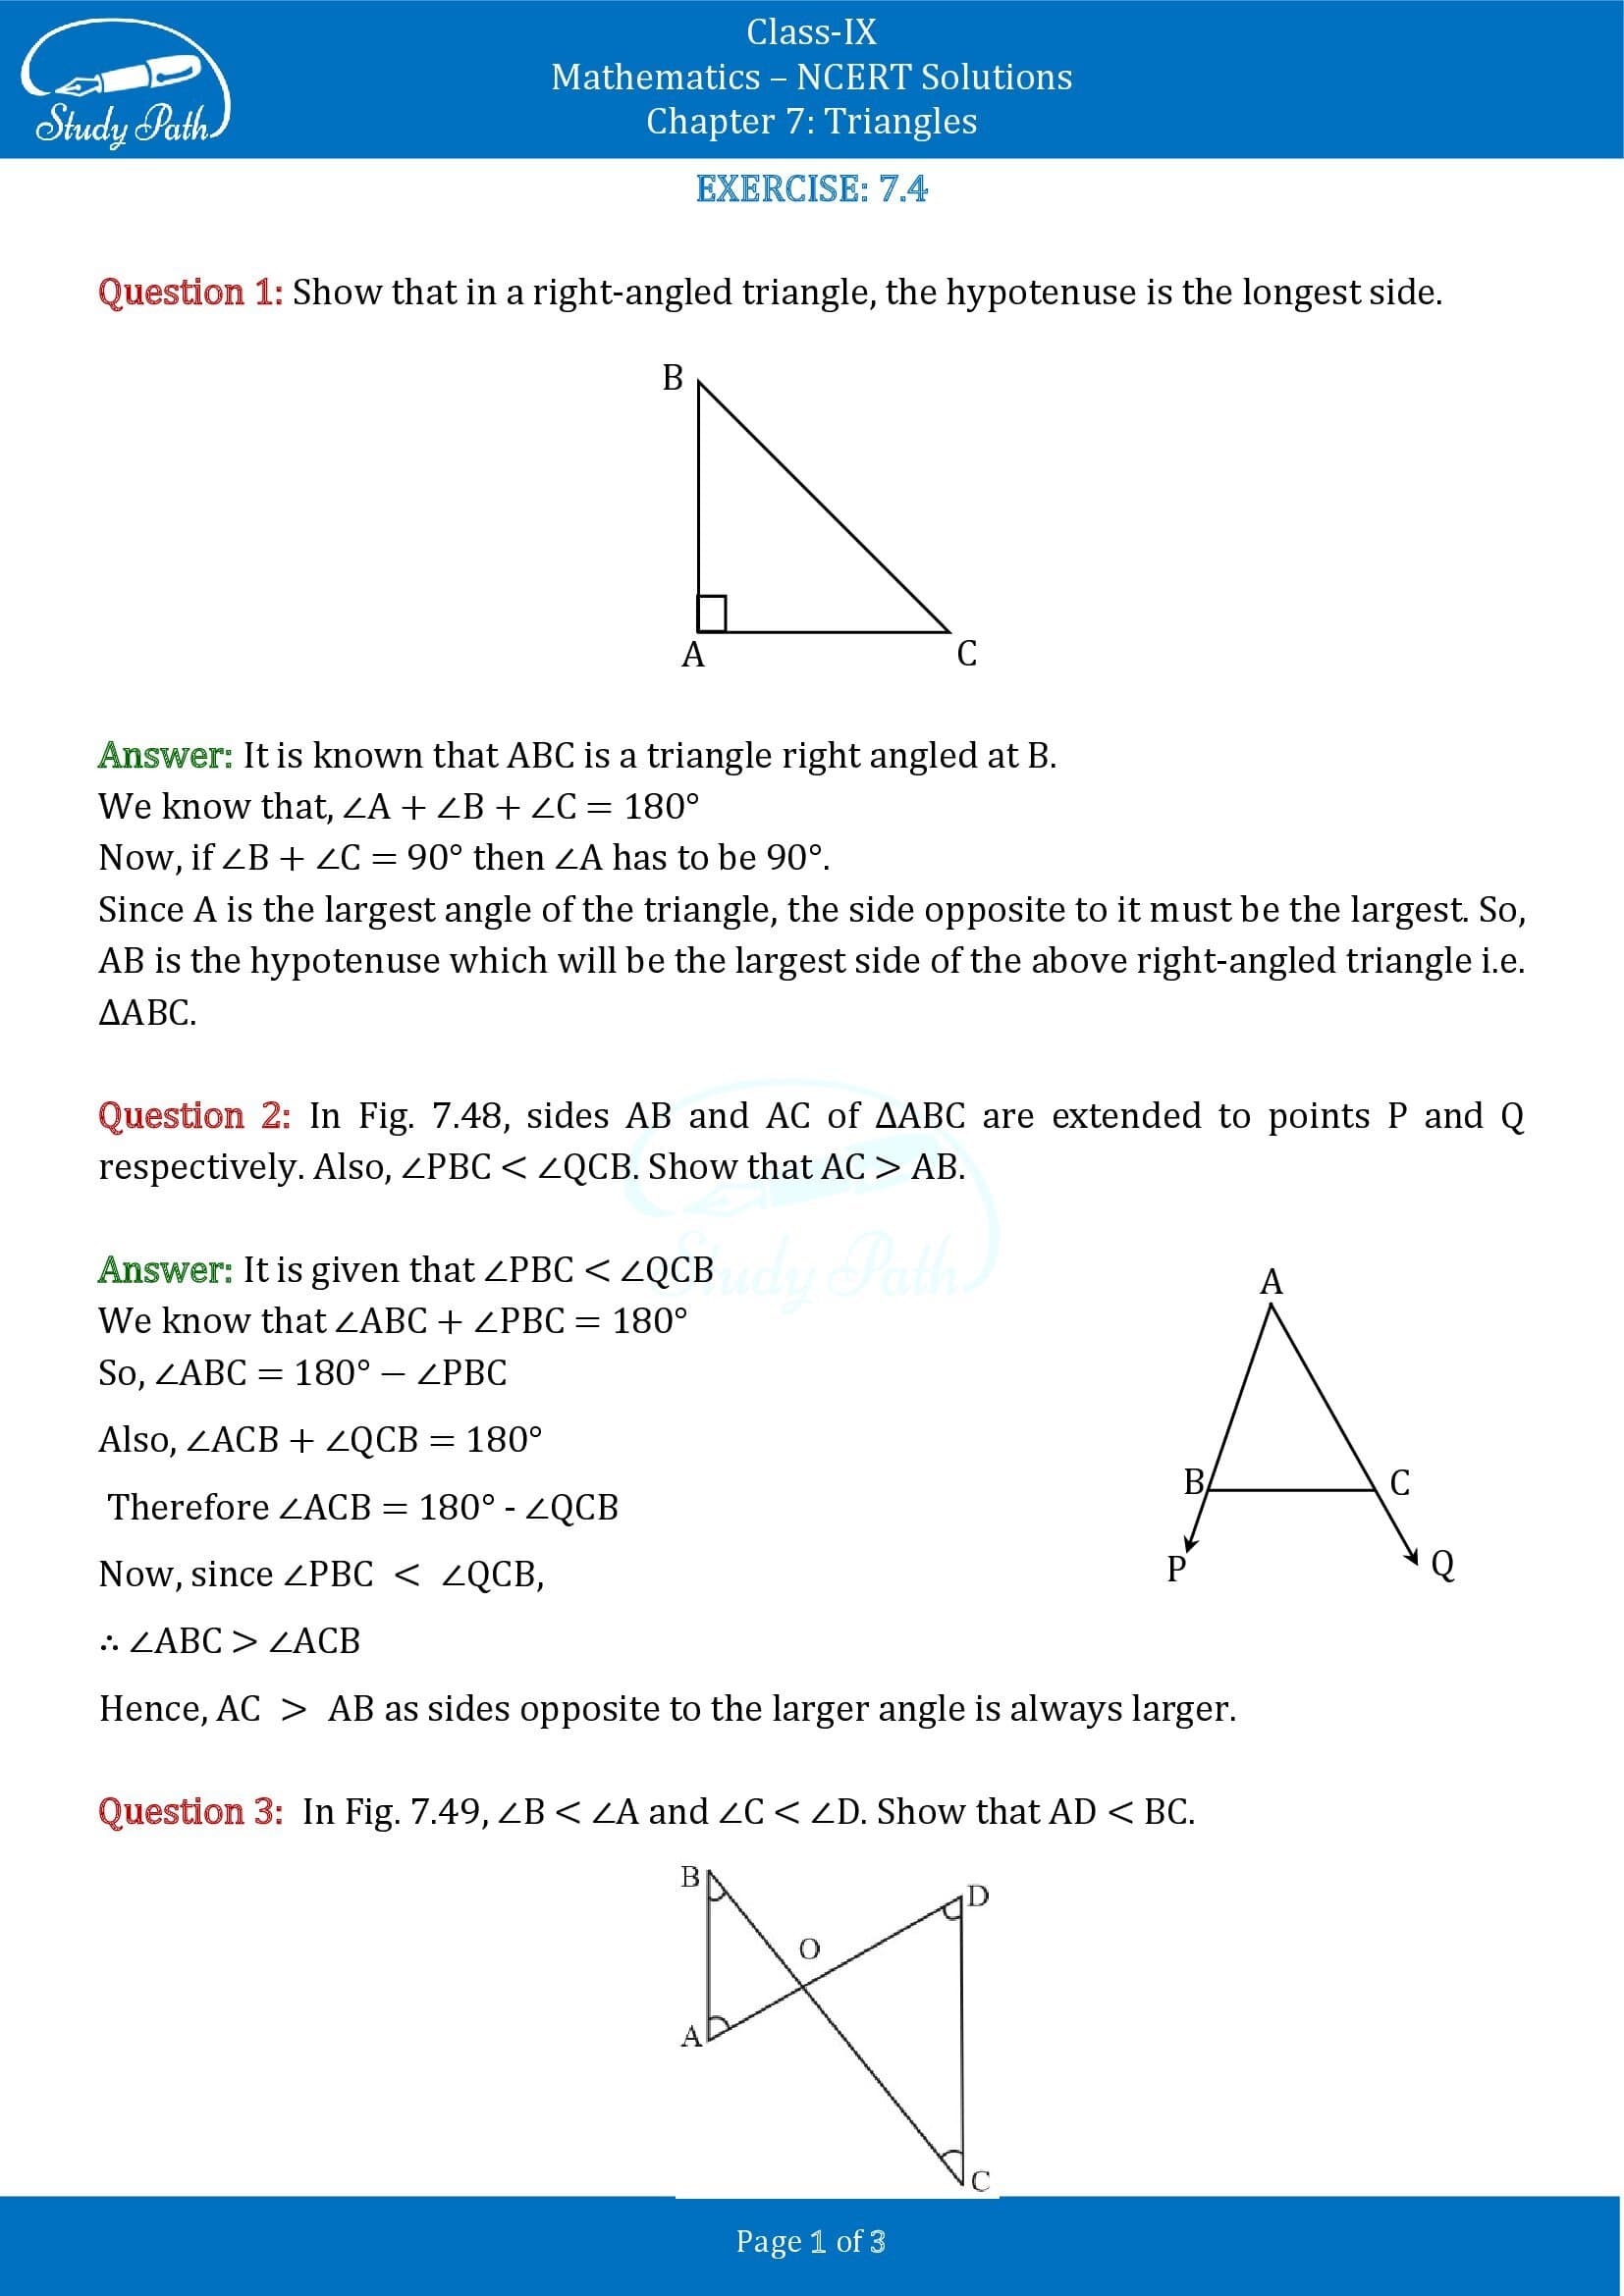 NCERT Solutions for Class 9 Maths Chapter 7 Triangles Exercise 7.4 00001